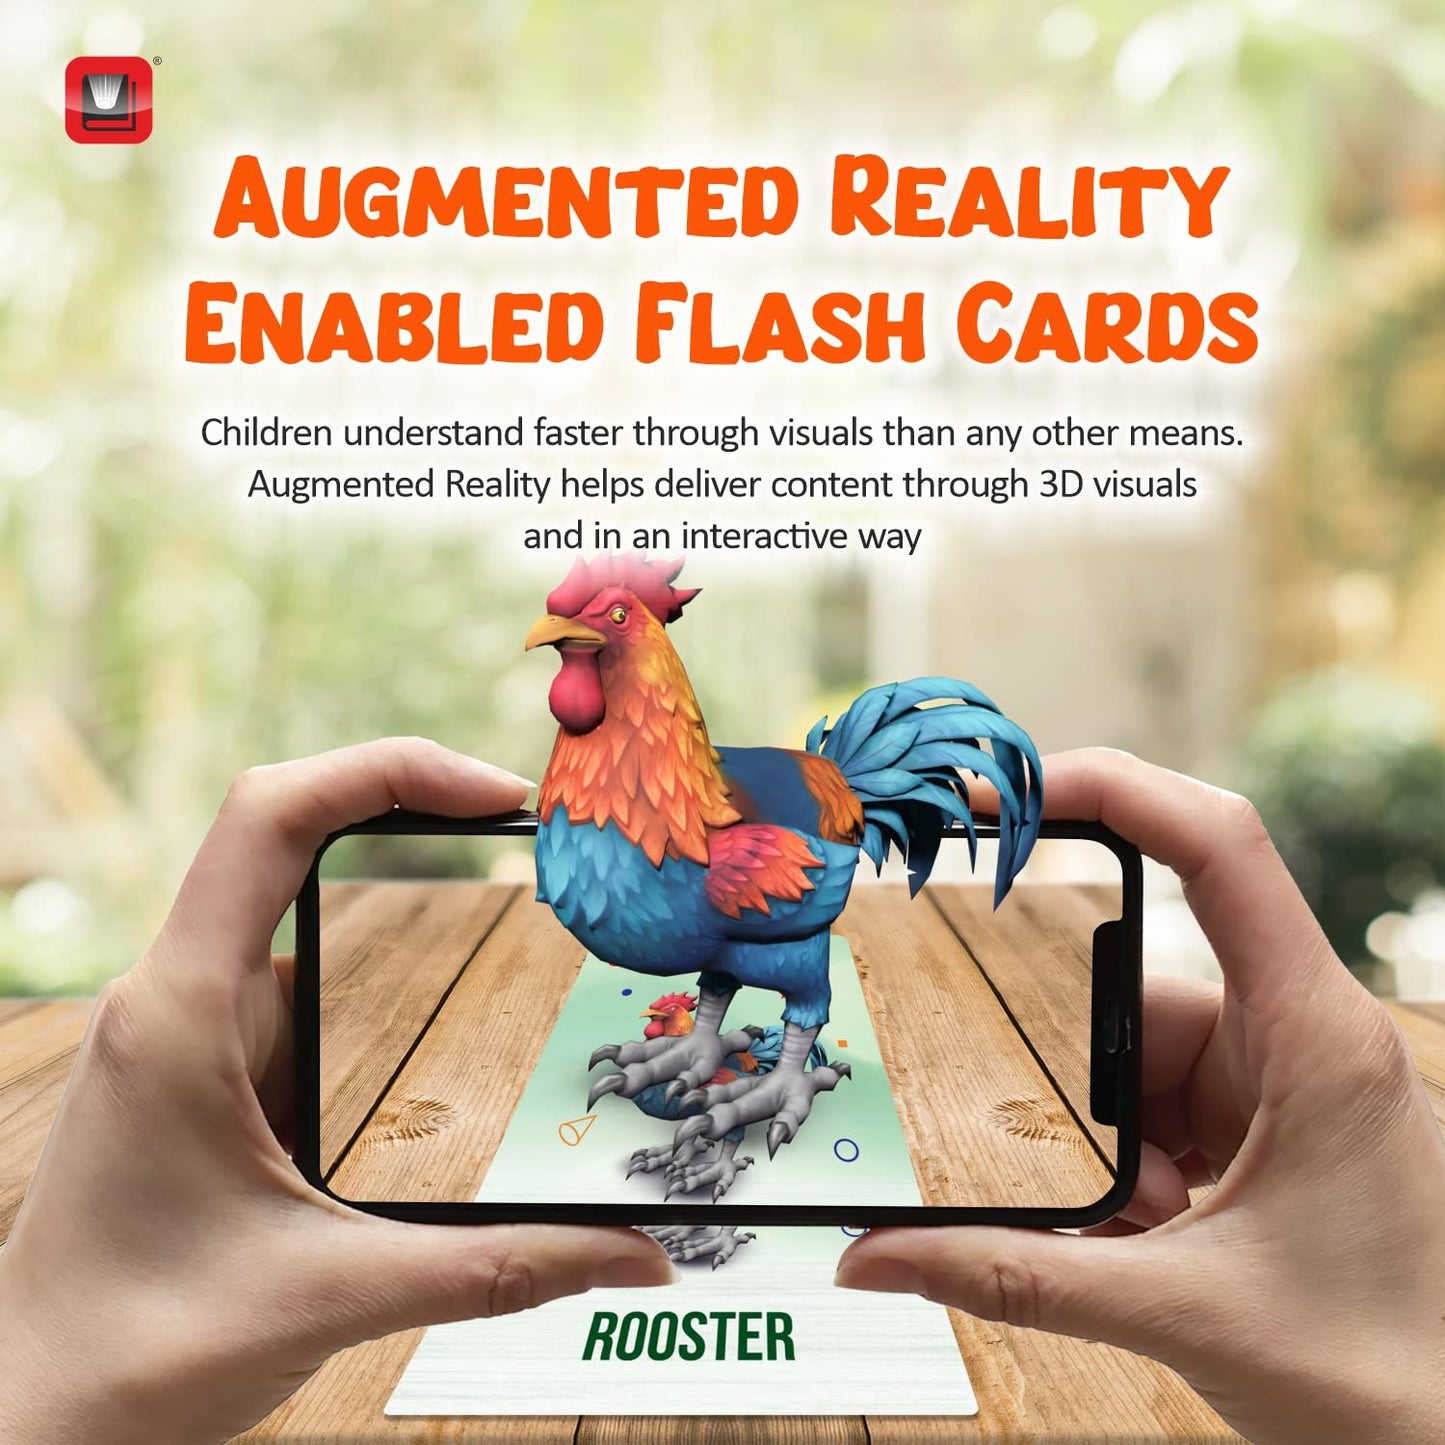 HoloKitab Augmented Reality Farm Animals Flashcards Kit: 17 Laminated Cards with Real Illustrations, Real Voices & 3D Animations | Enhance Early Learning for Kindergarten